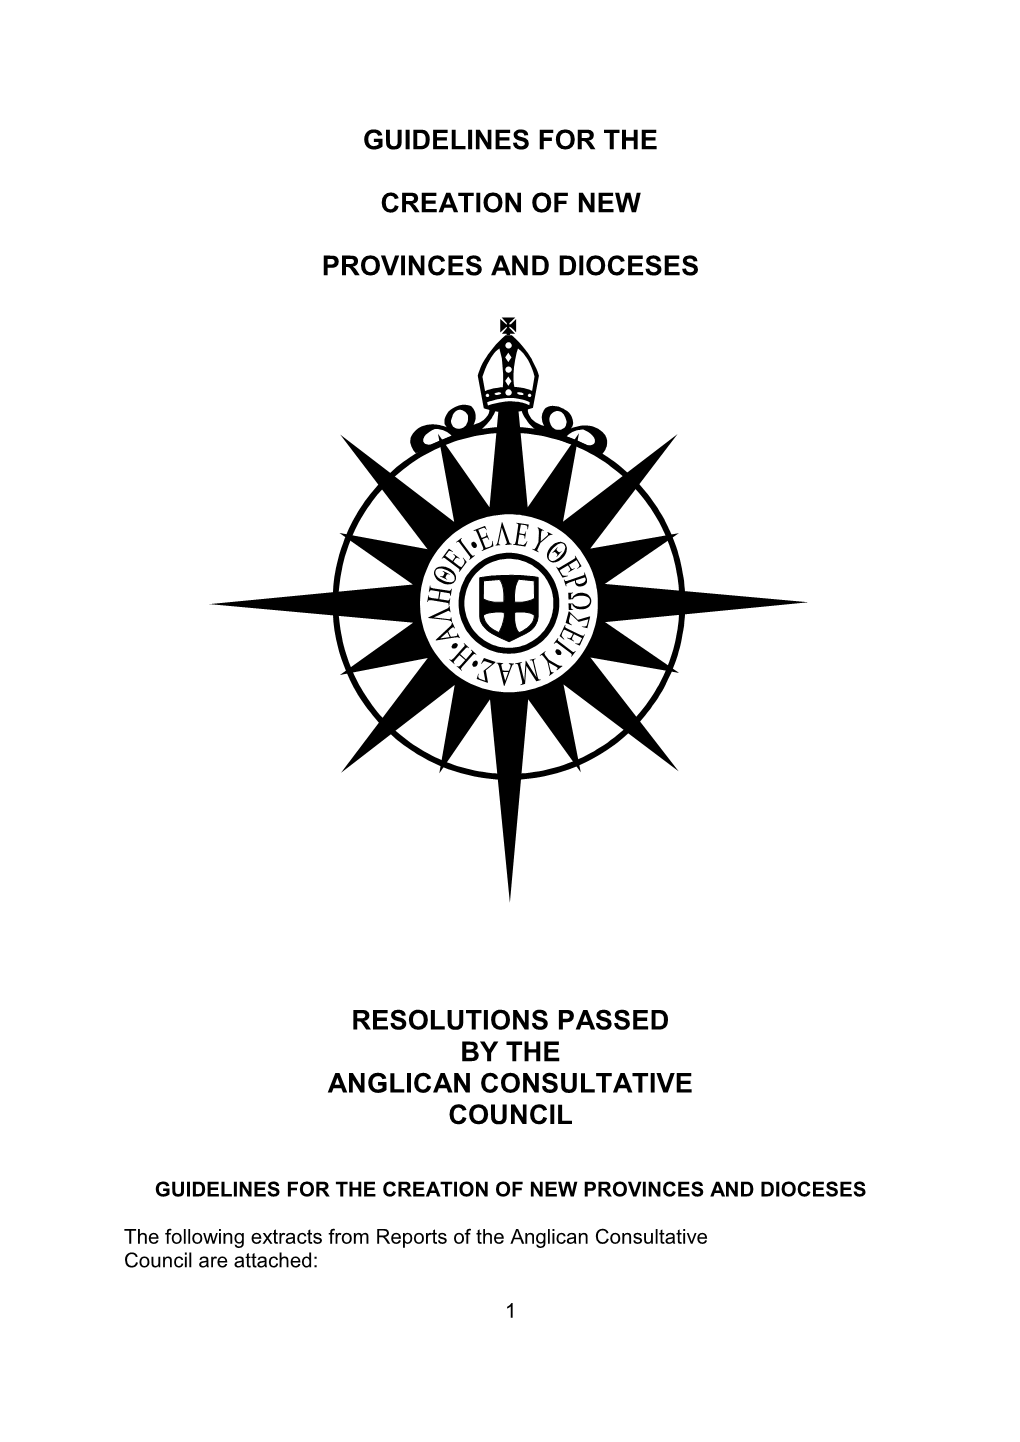 Guidelines for the Creation of New Provinces and Dioceses